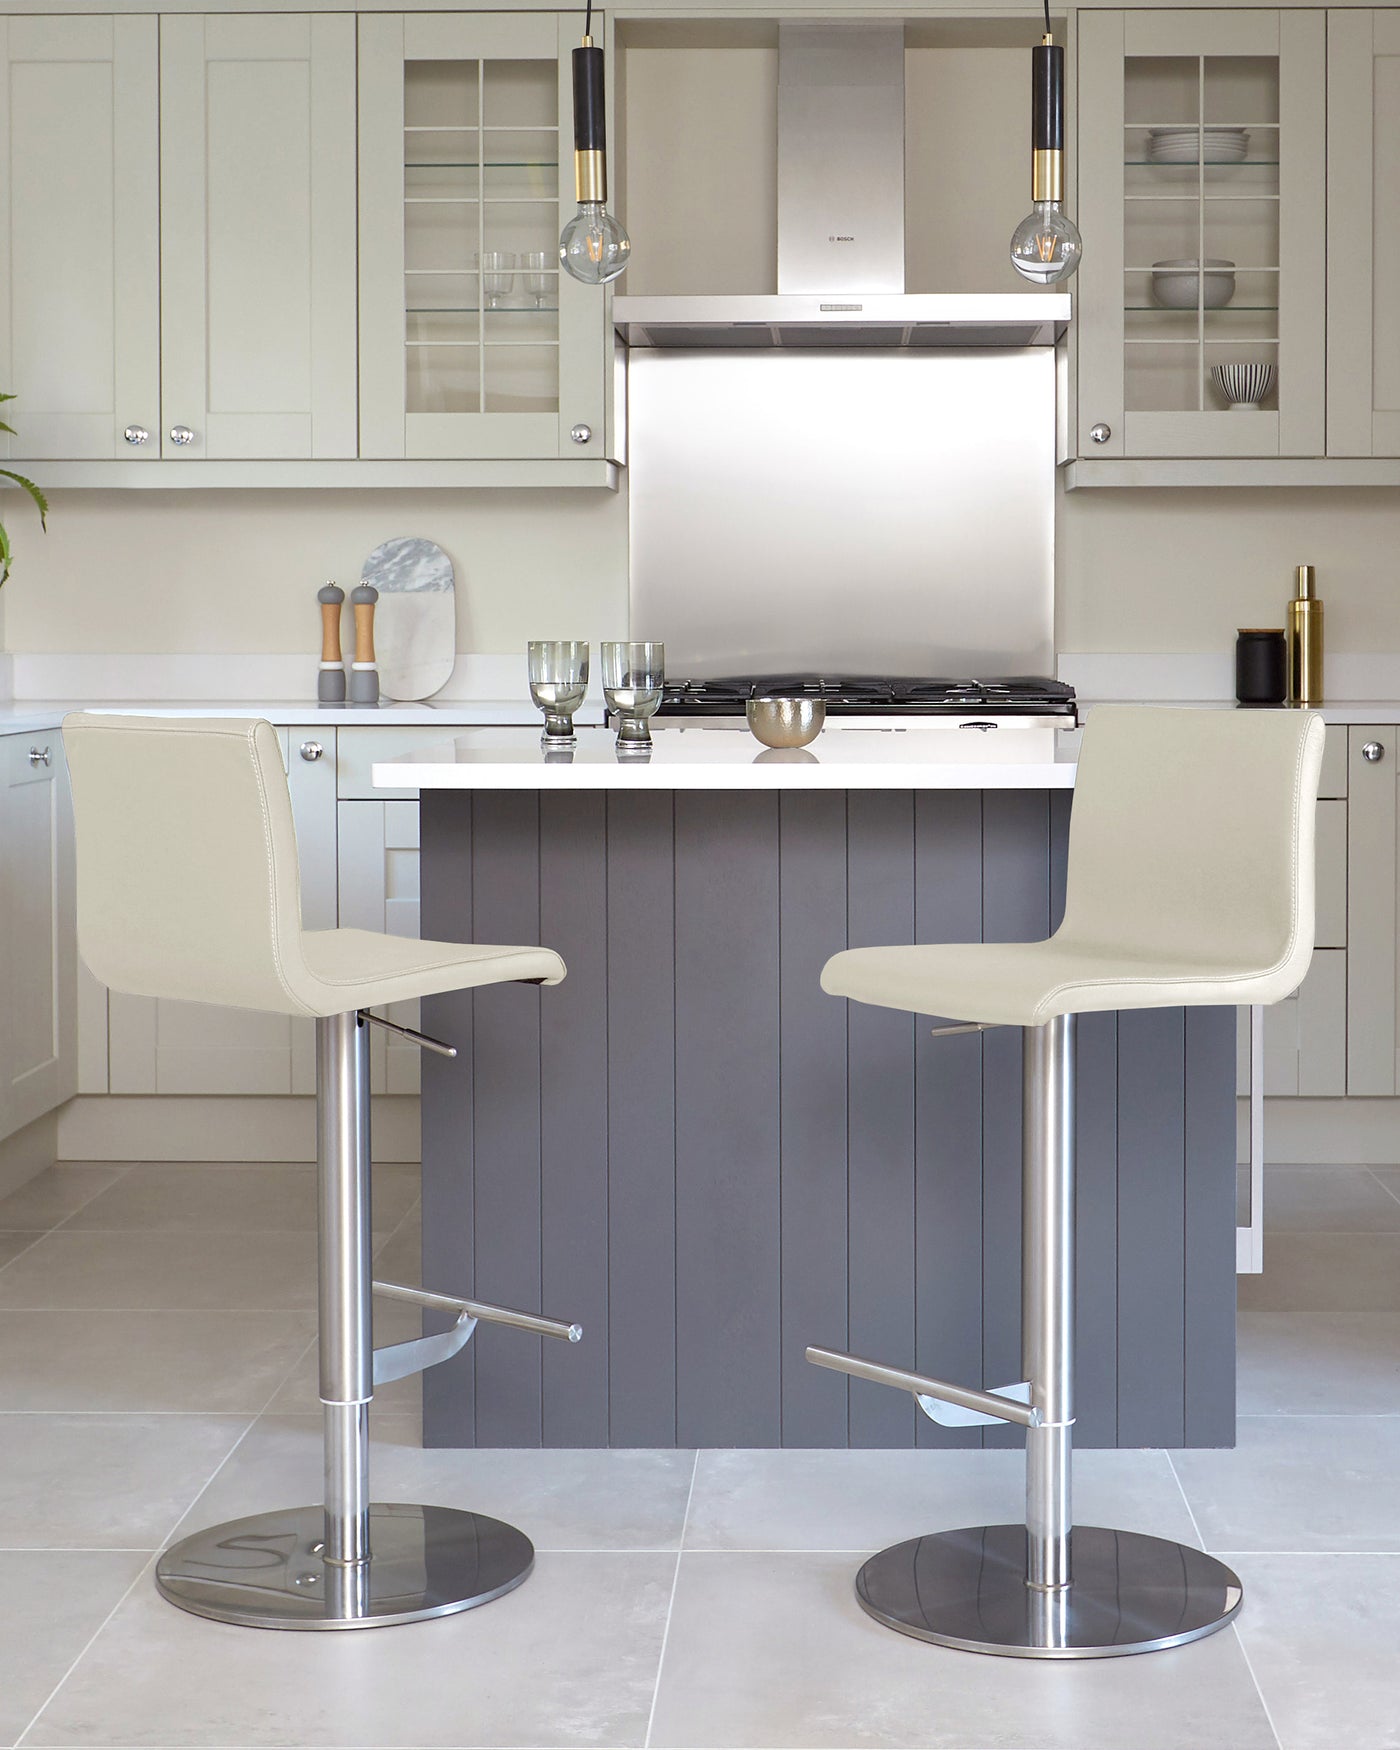 Modern kitchen with two adjustable-height bar stools featuring cream upholstery and a sleek chrome base with footrests, positioned at a kitchen island with a grey countertop.